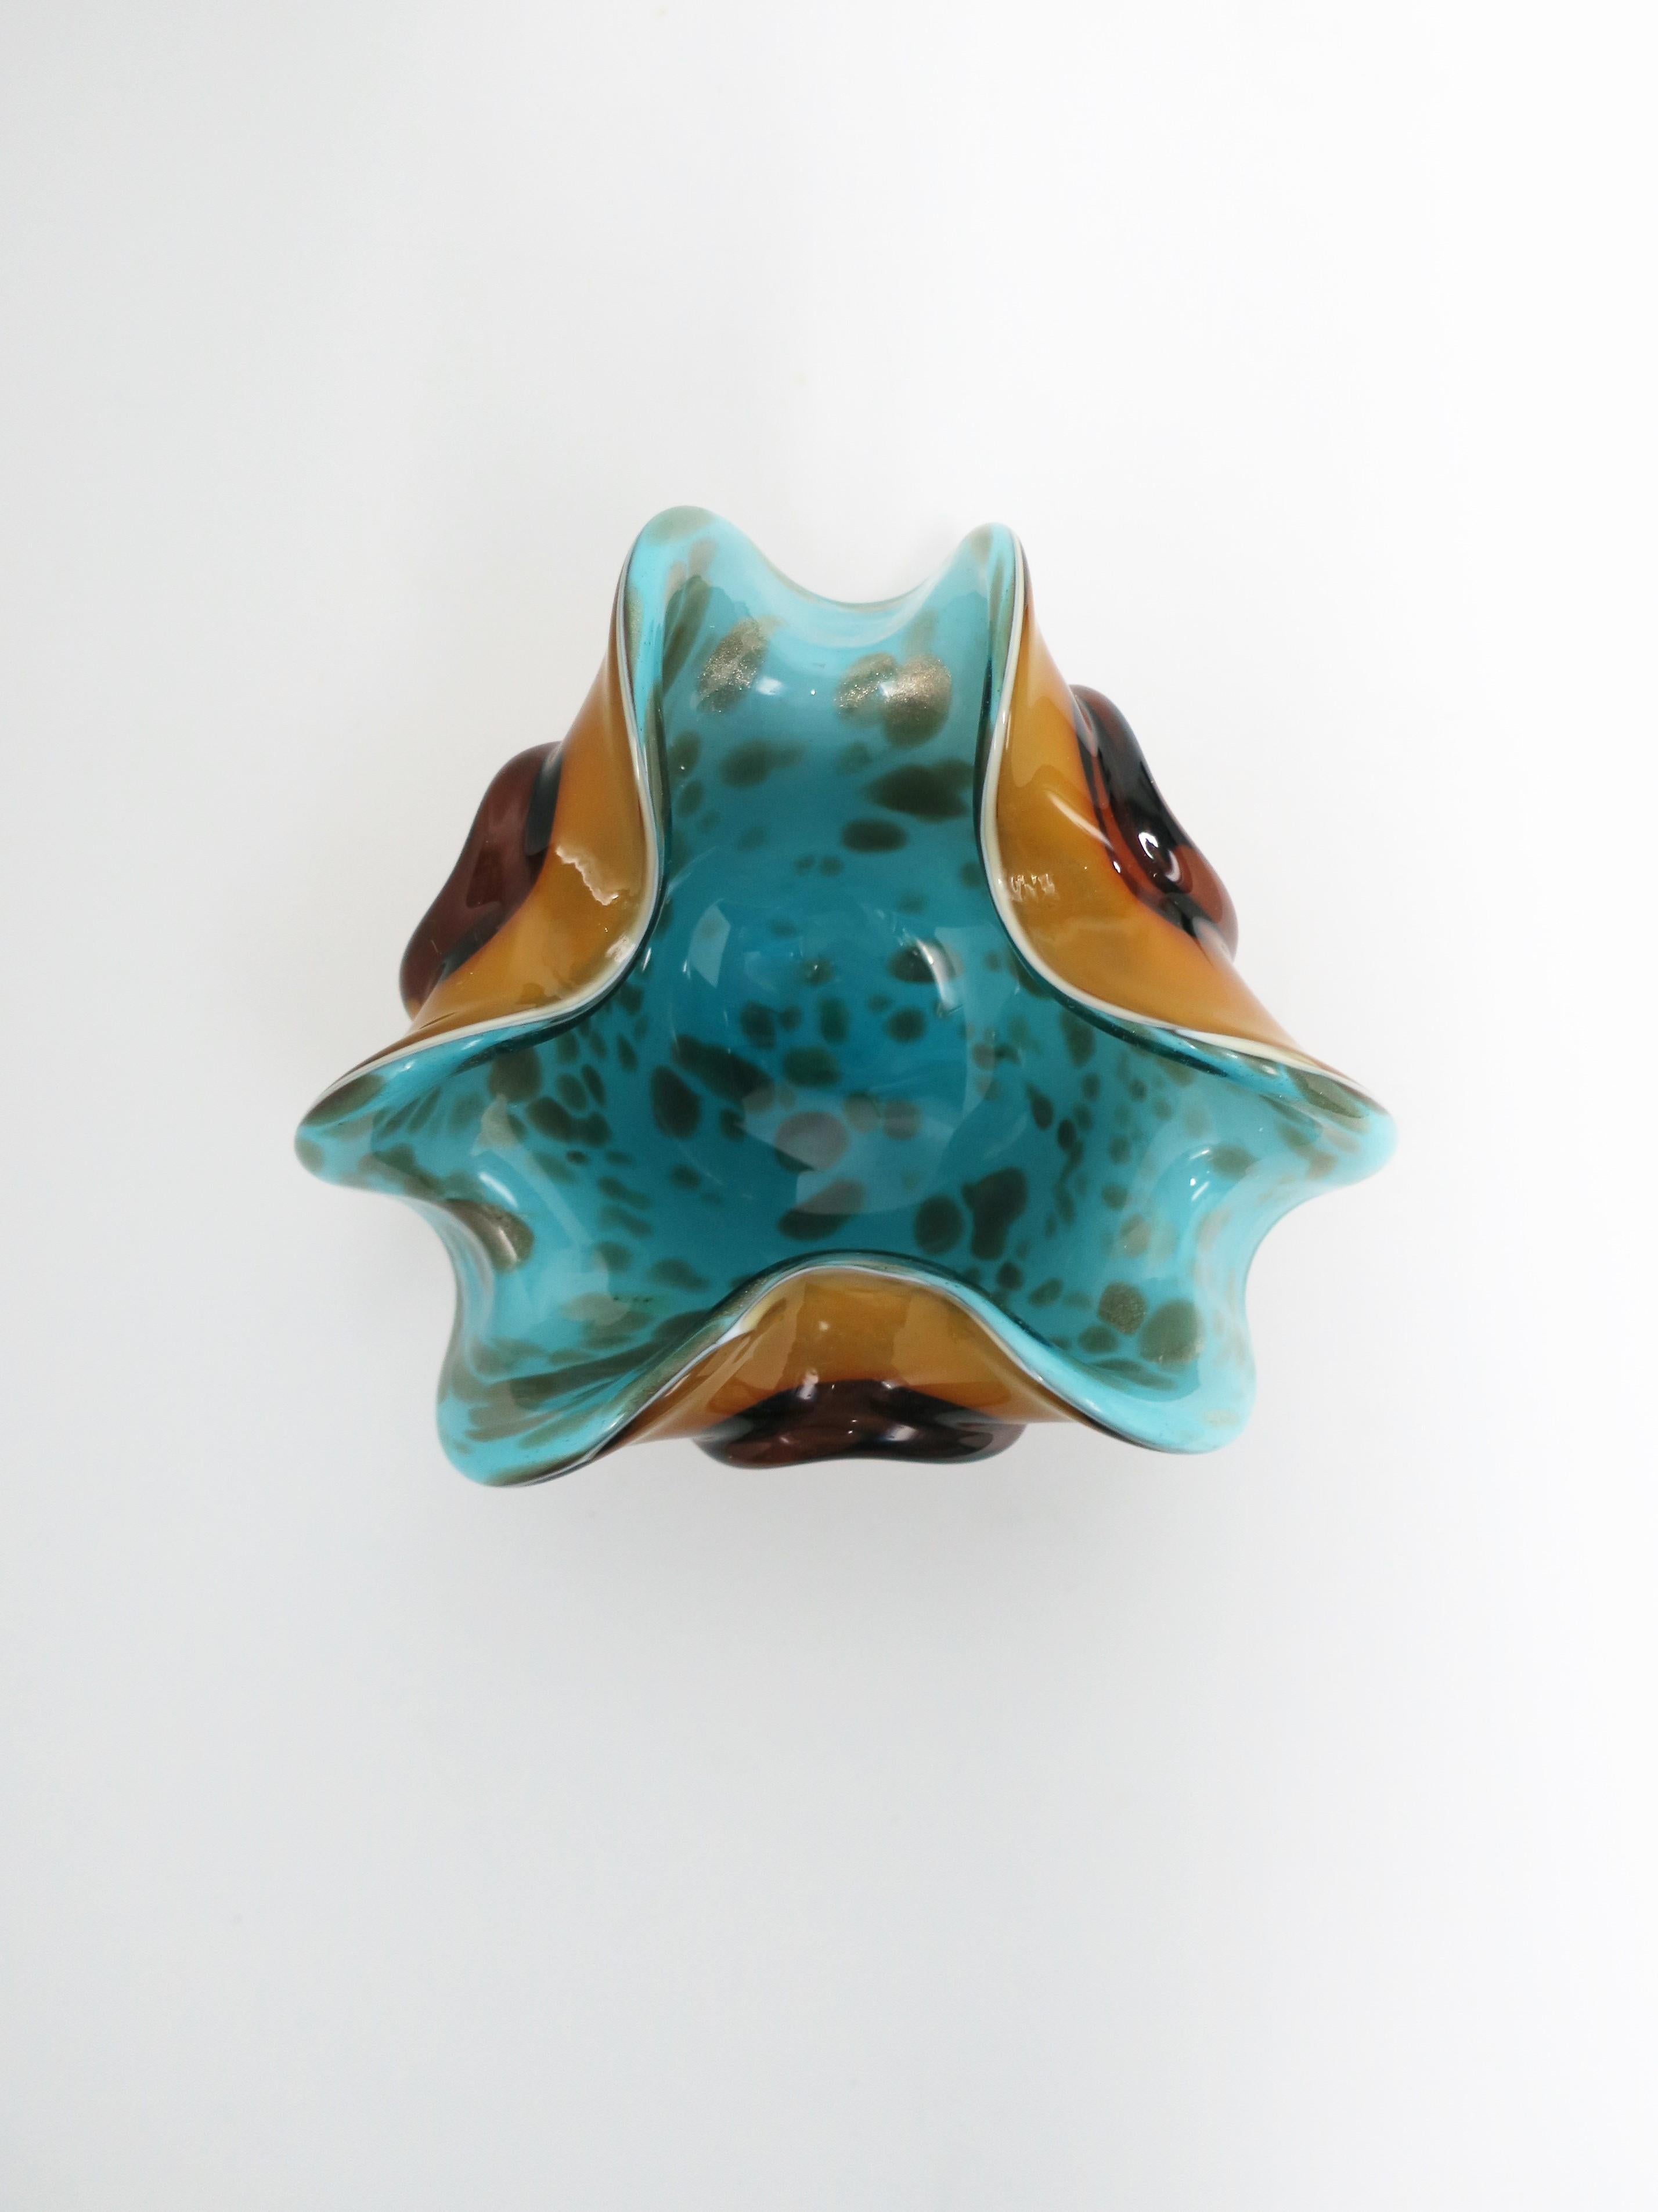 Mid-Century Modern Italian Murano Art Glass Bowl in Turquoise Blue and Gold, circa 1960s